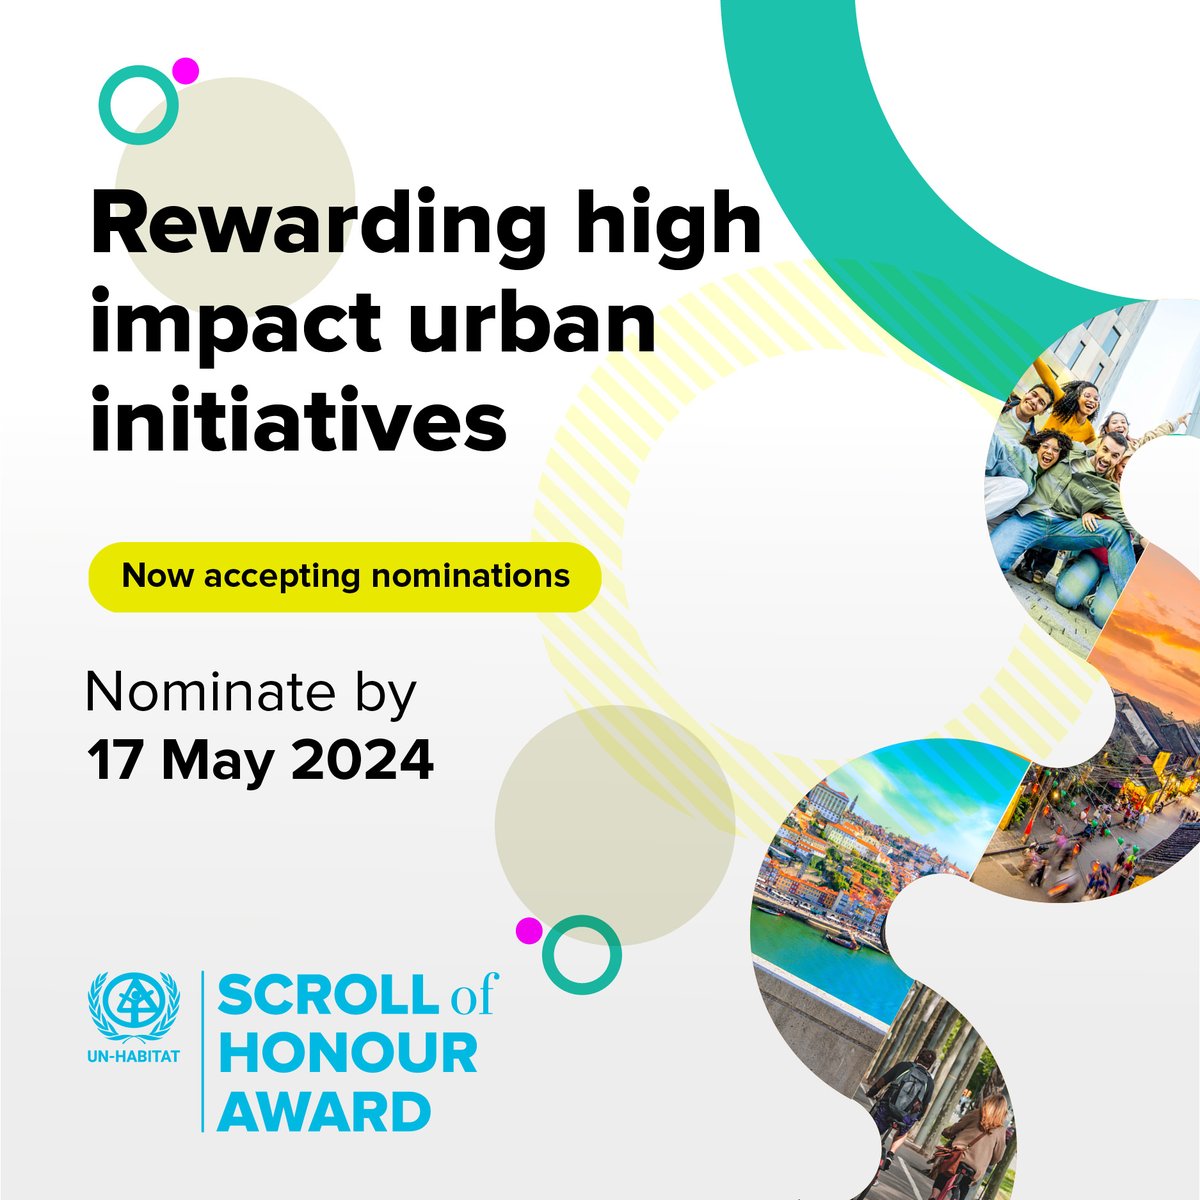 Only four days left to submit your nominations for the #ScrollOfHonourAward.The award celebrates initiatives for their contribution to urban development, improving the quality of urban life & adequate housing. Nominate an outstanding initiative today! loom.ly/hJFv3n0